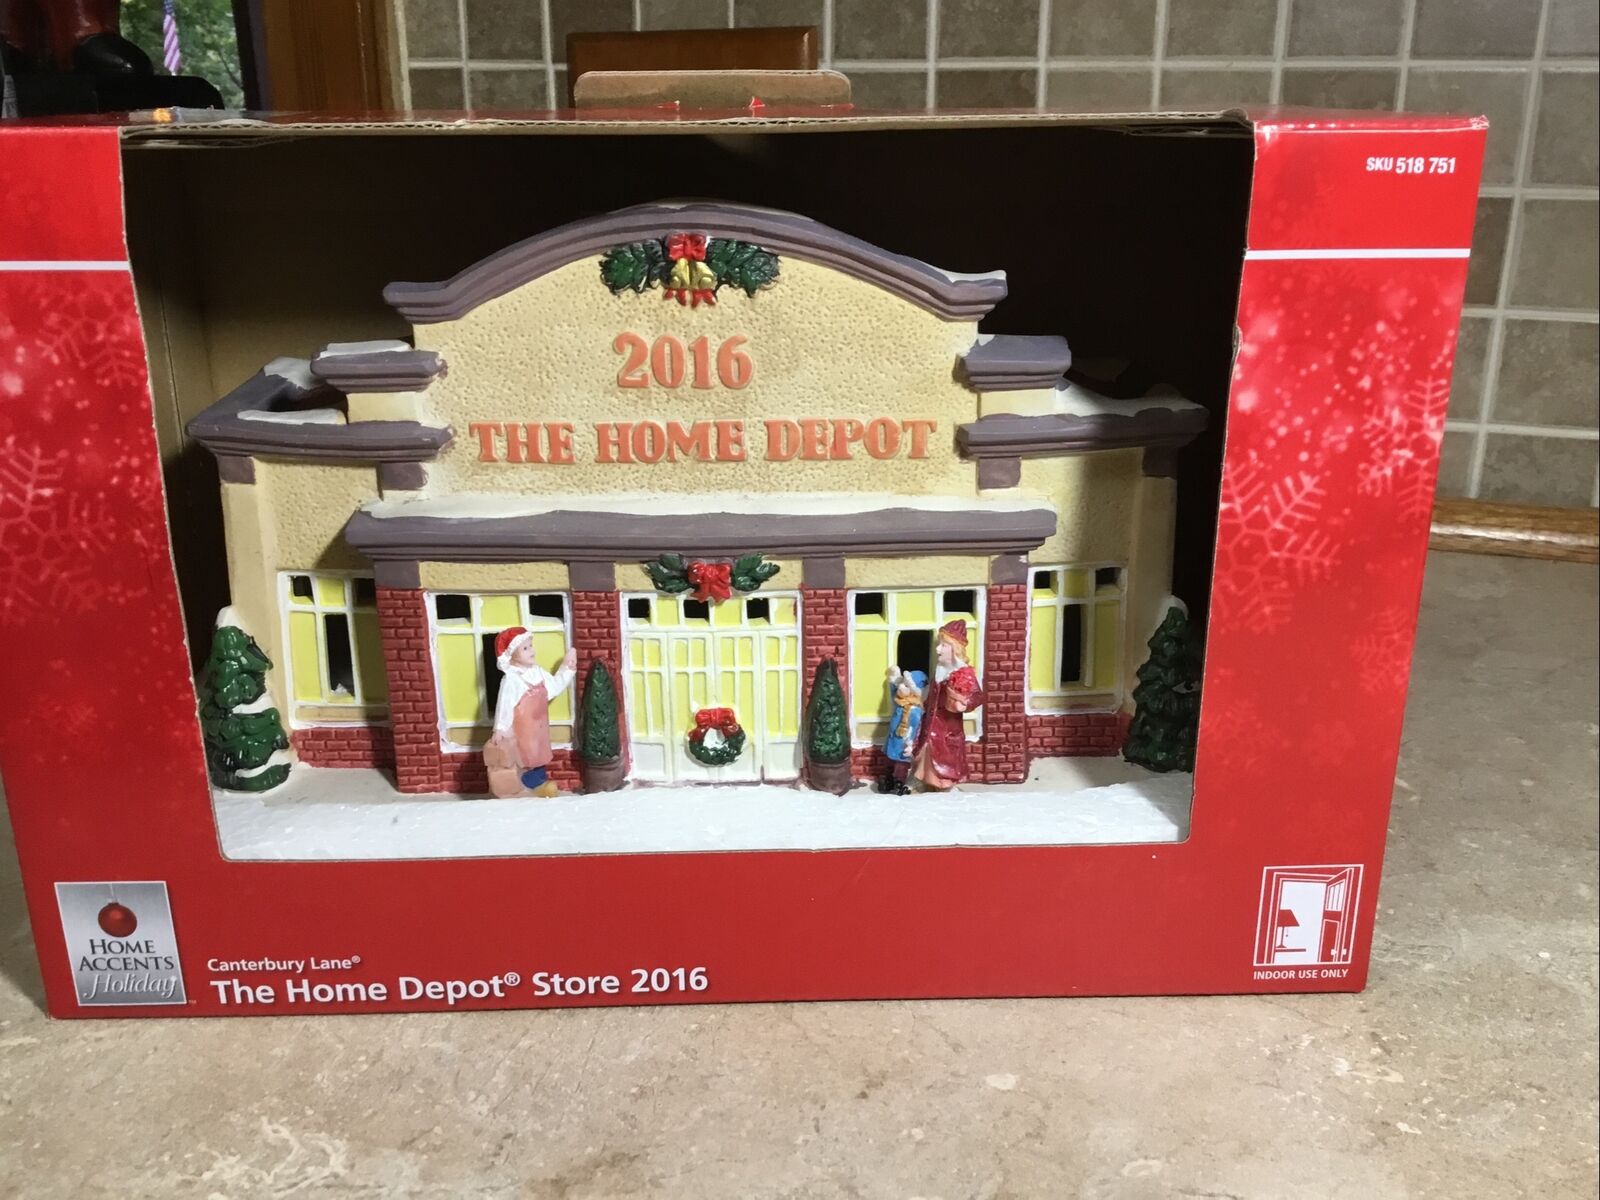 Canterbury Lane Home Accents Holiday Lights Up Home Depot Store 2016